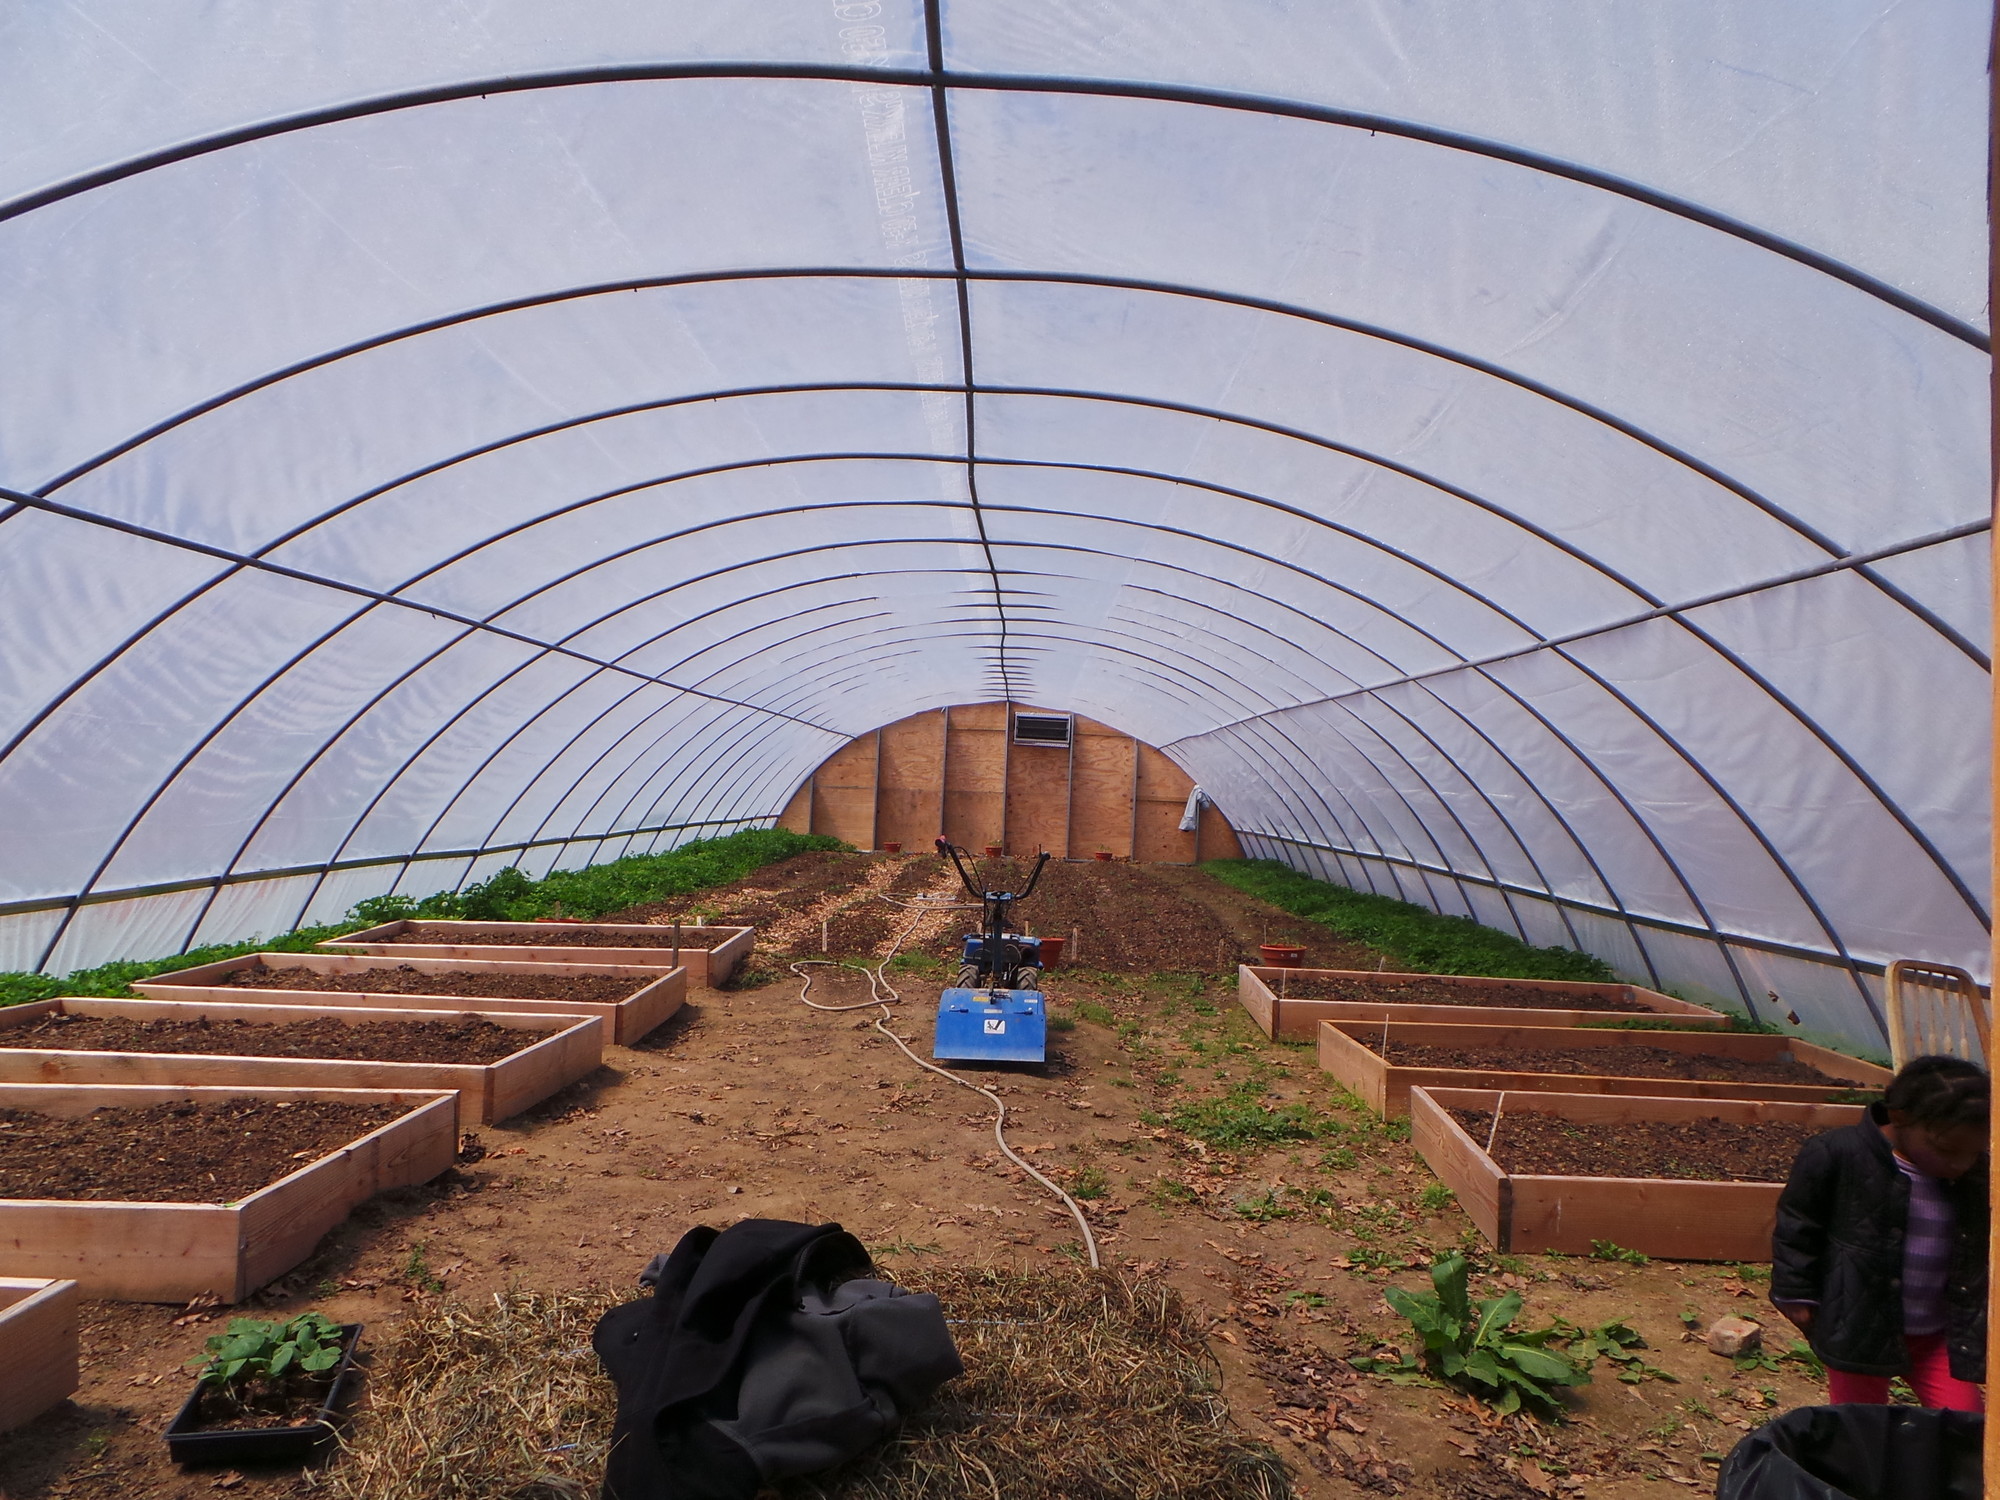 The farm’s hoop house contains 400 tomato plants and raised beds of micro greens.